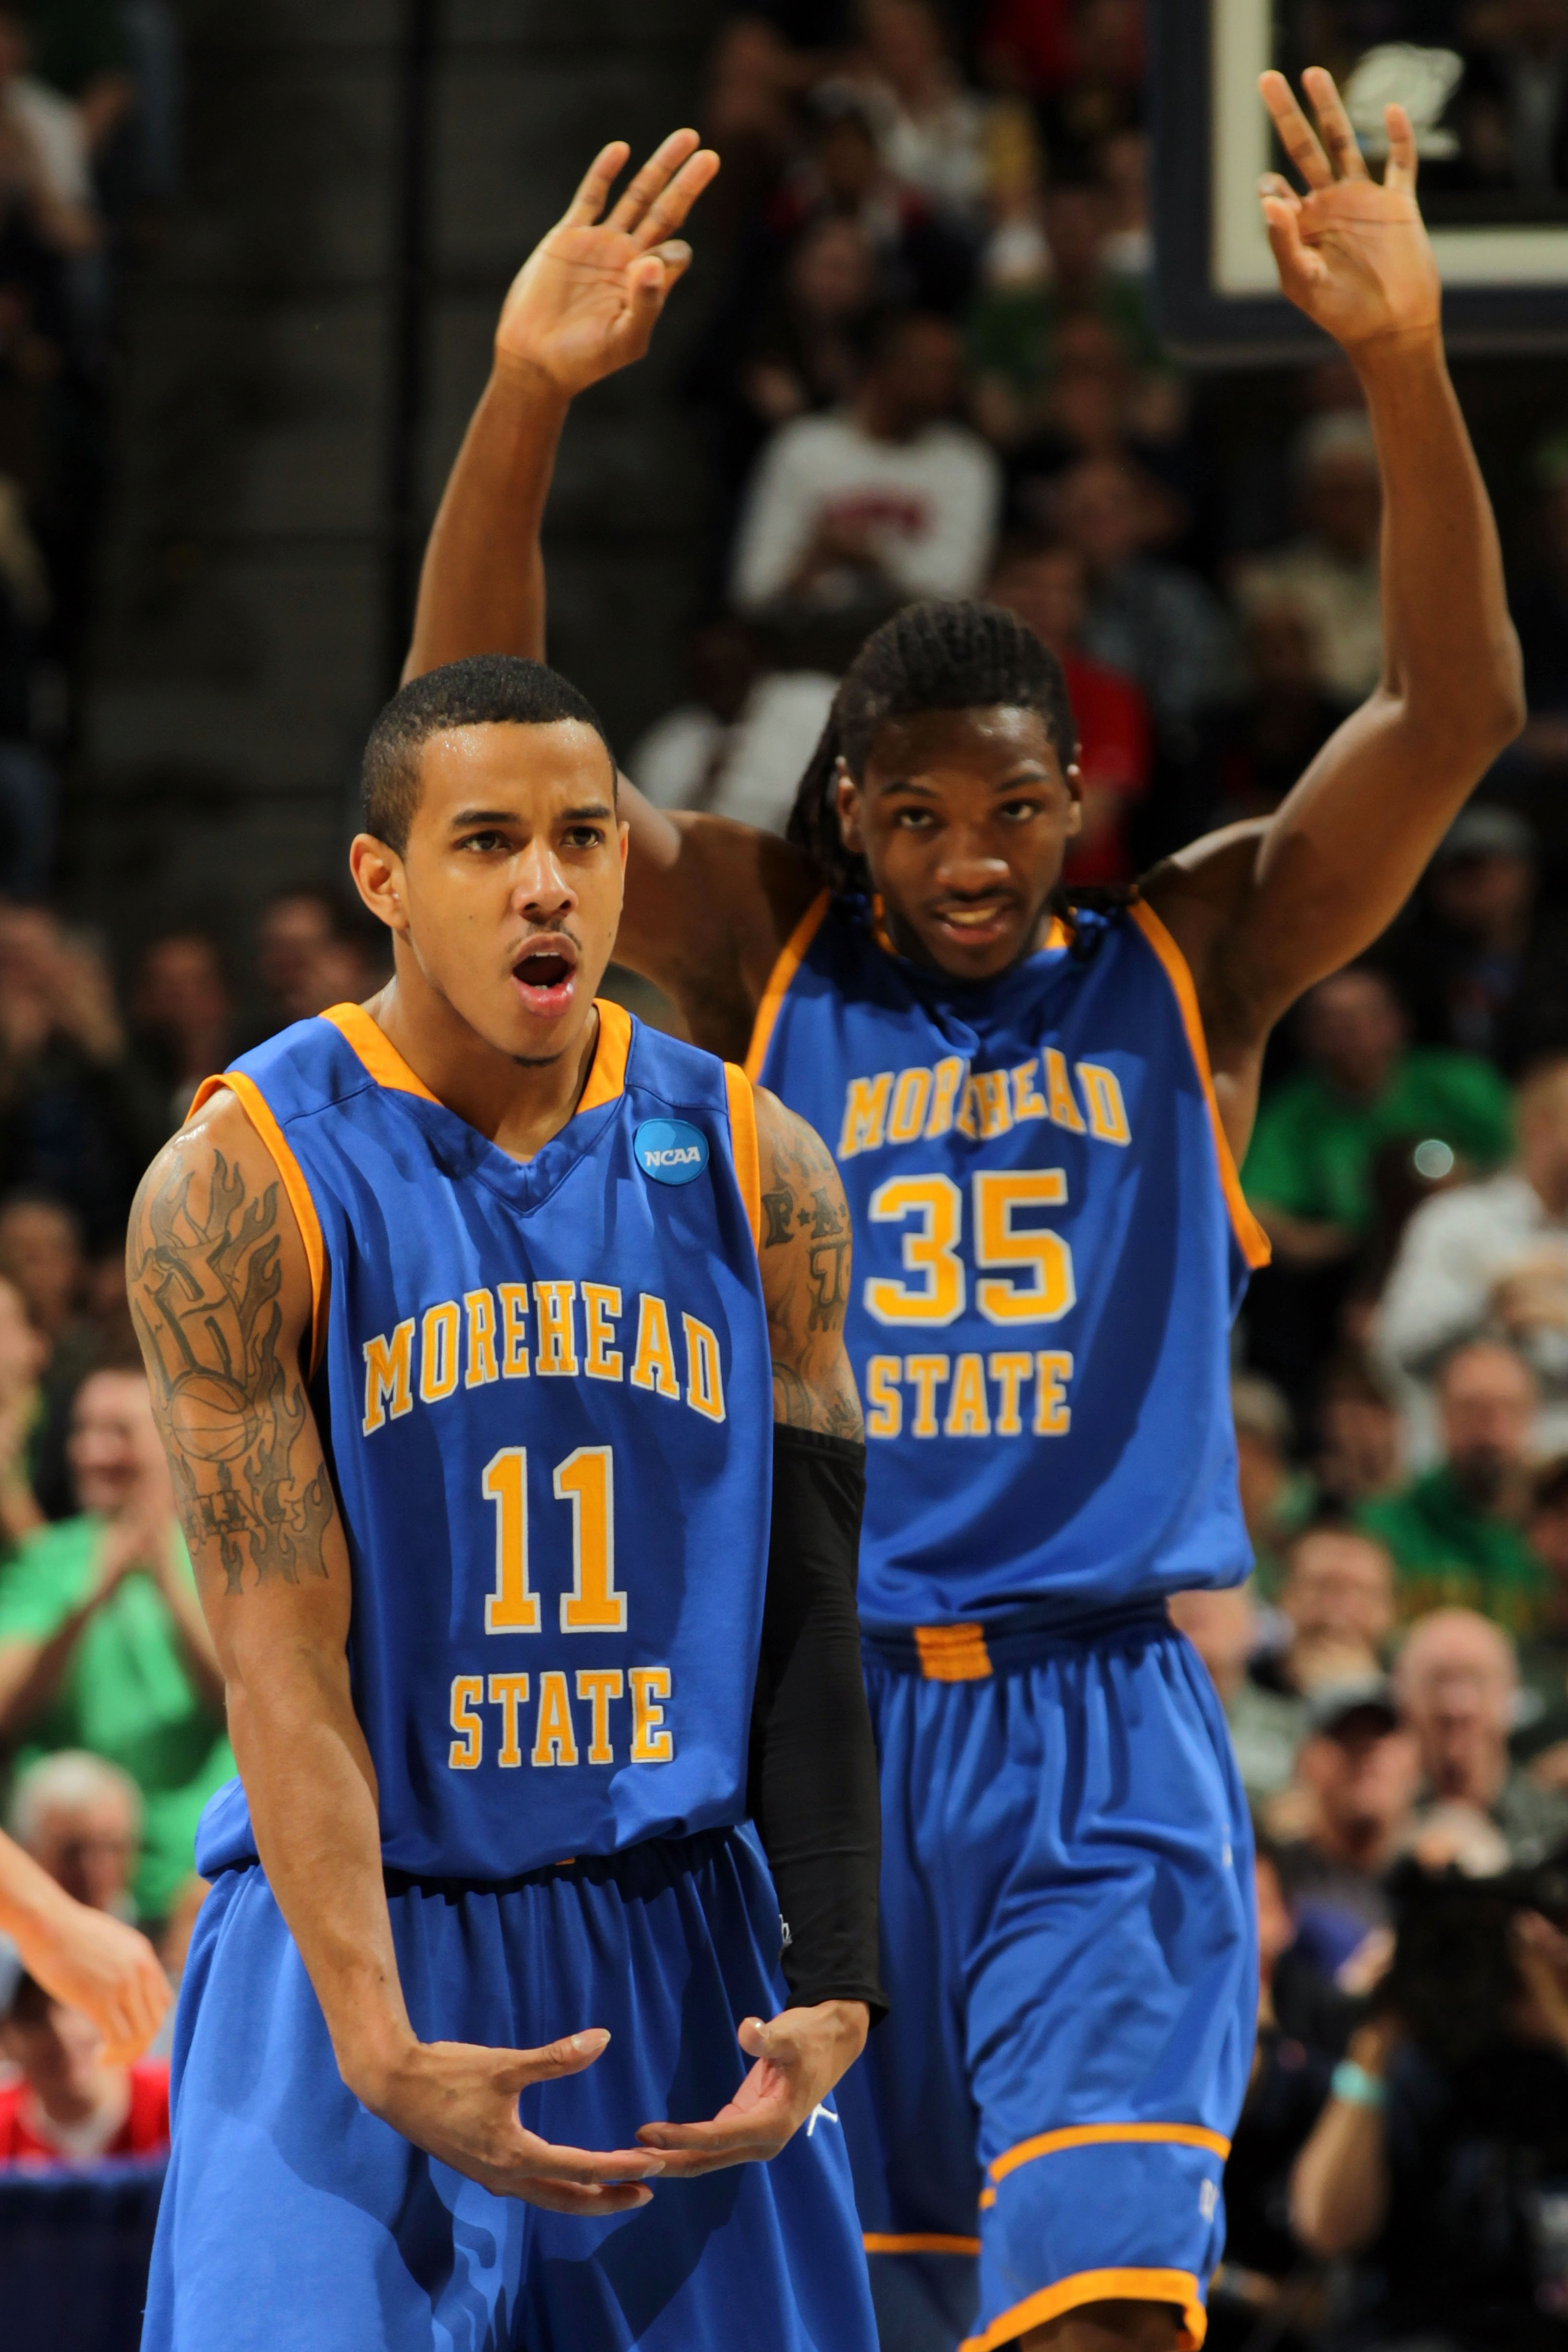 DENVER, CO - MARCH 17:  Terrance Hill #11 of the Morehead State Eagles reacts after hitting a three pointer in the second half as Kenneth Faried #35 looks on against the Louisville Cardinals during the second round of the 2011 NCAA men's basketball tourna